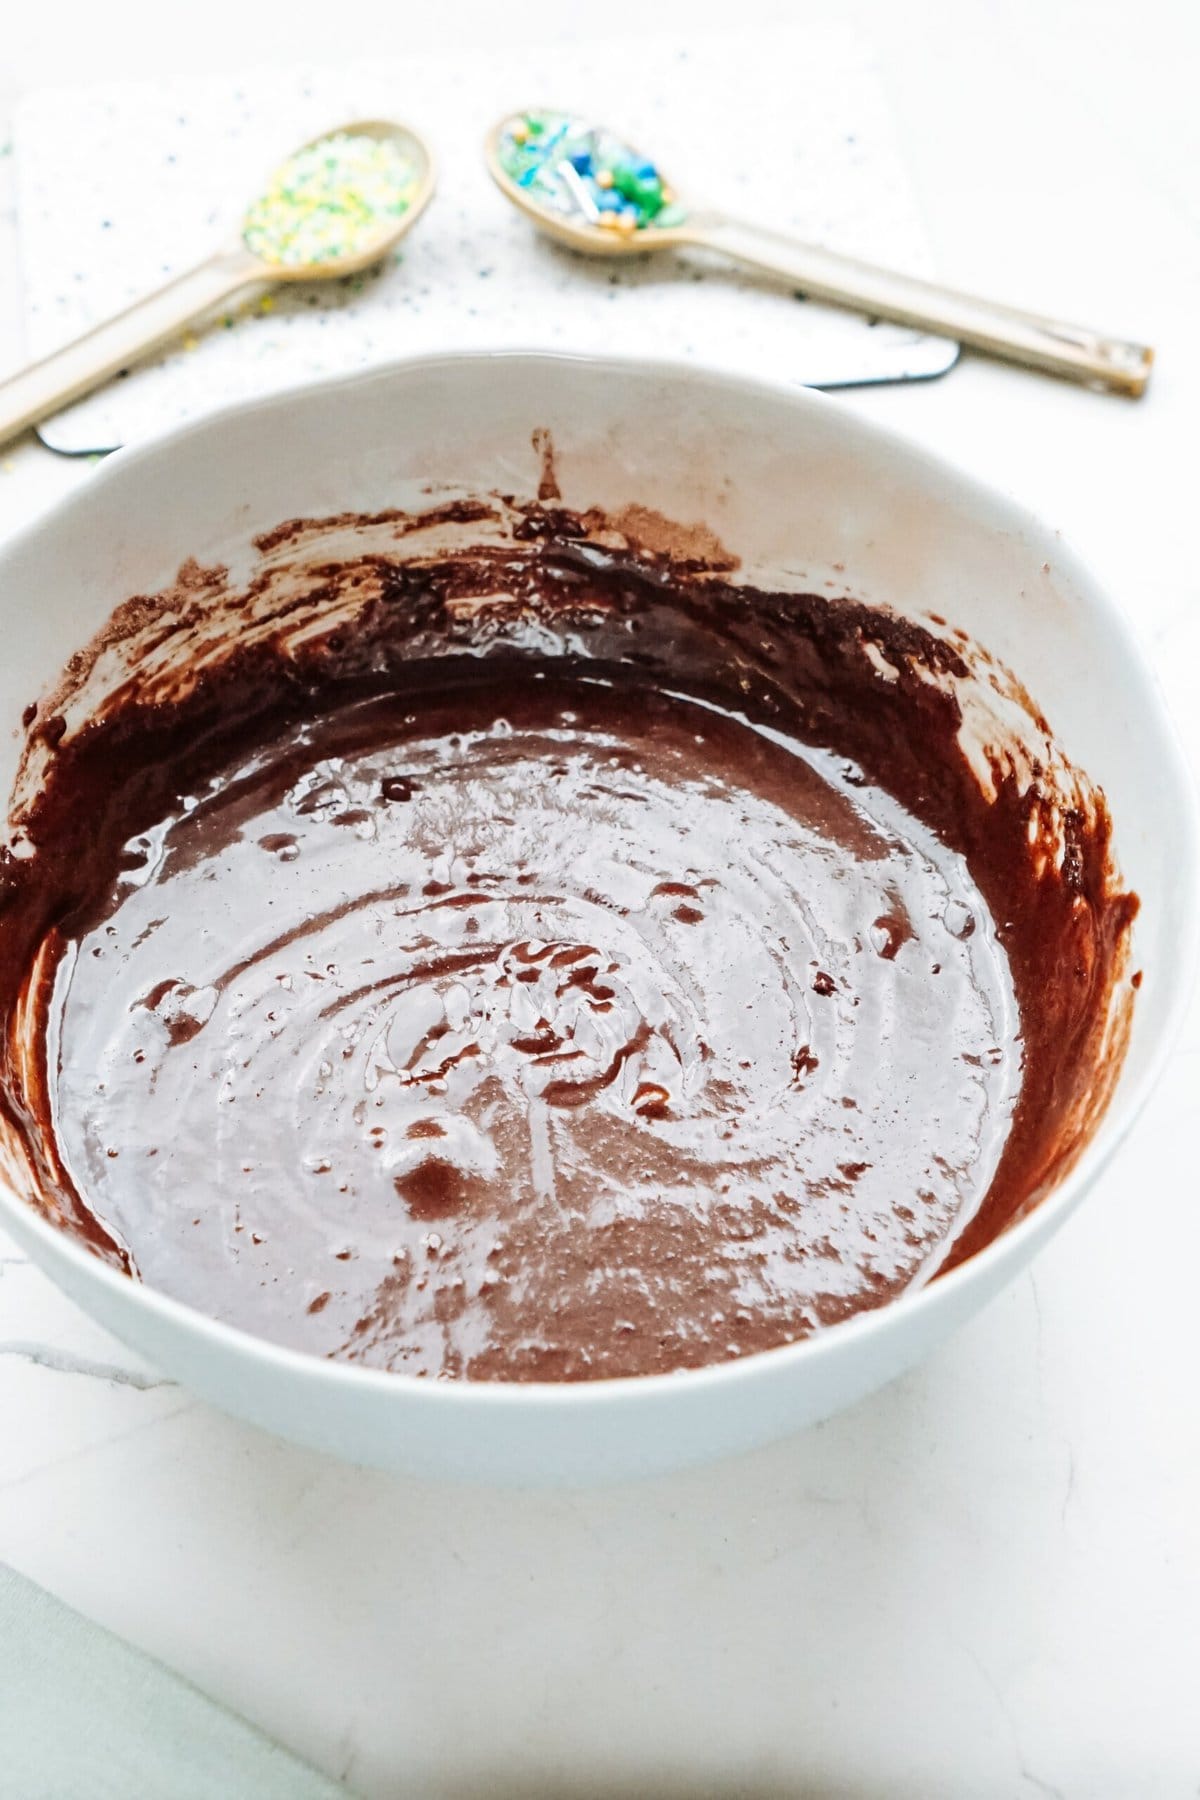 A bowl of chocolate cake batter with spoons next to it.